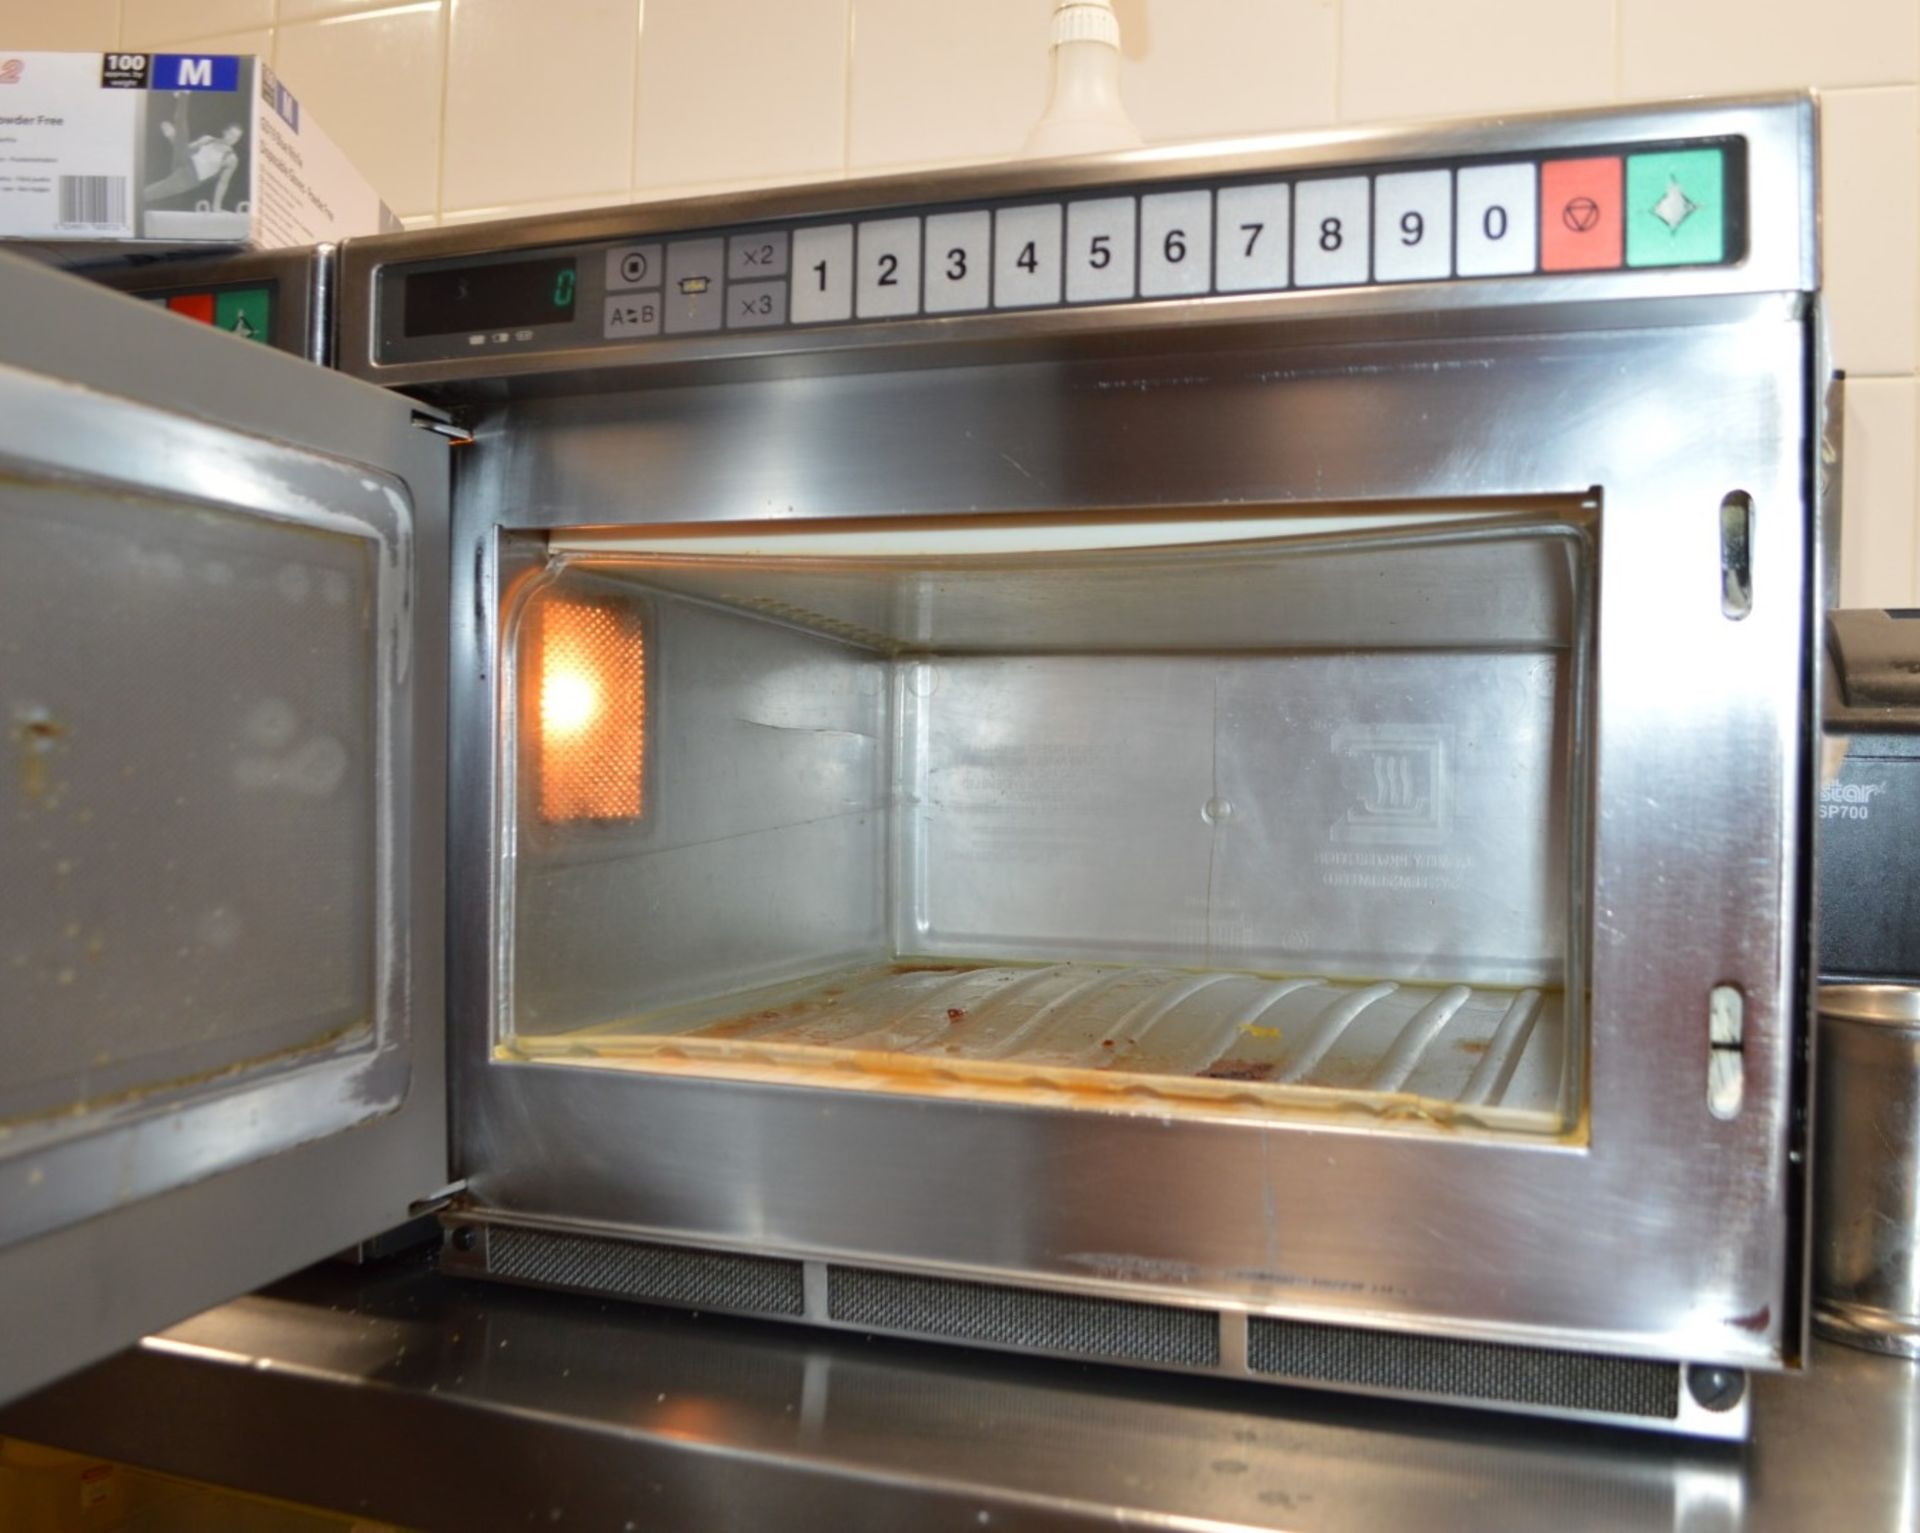 1 x Panasonic Commercial Microwave Oven With Stainless Steel Exterior and Wall Mounted Shelf - Ref - Image 2 of 2